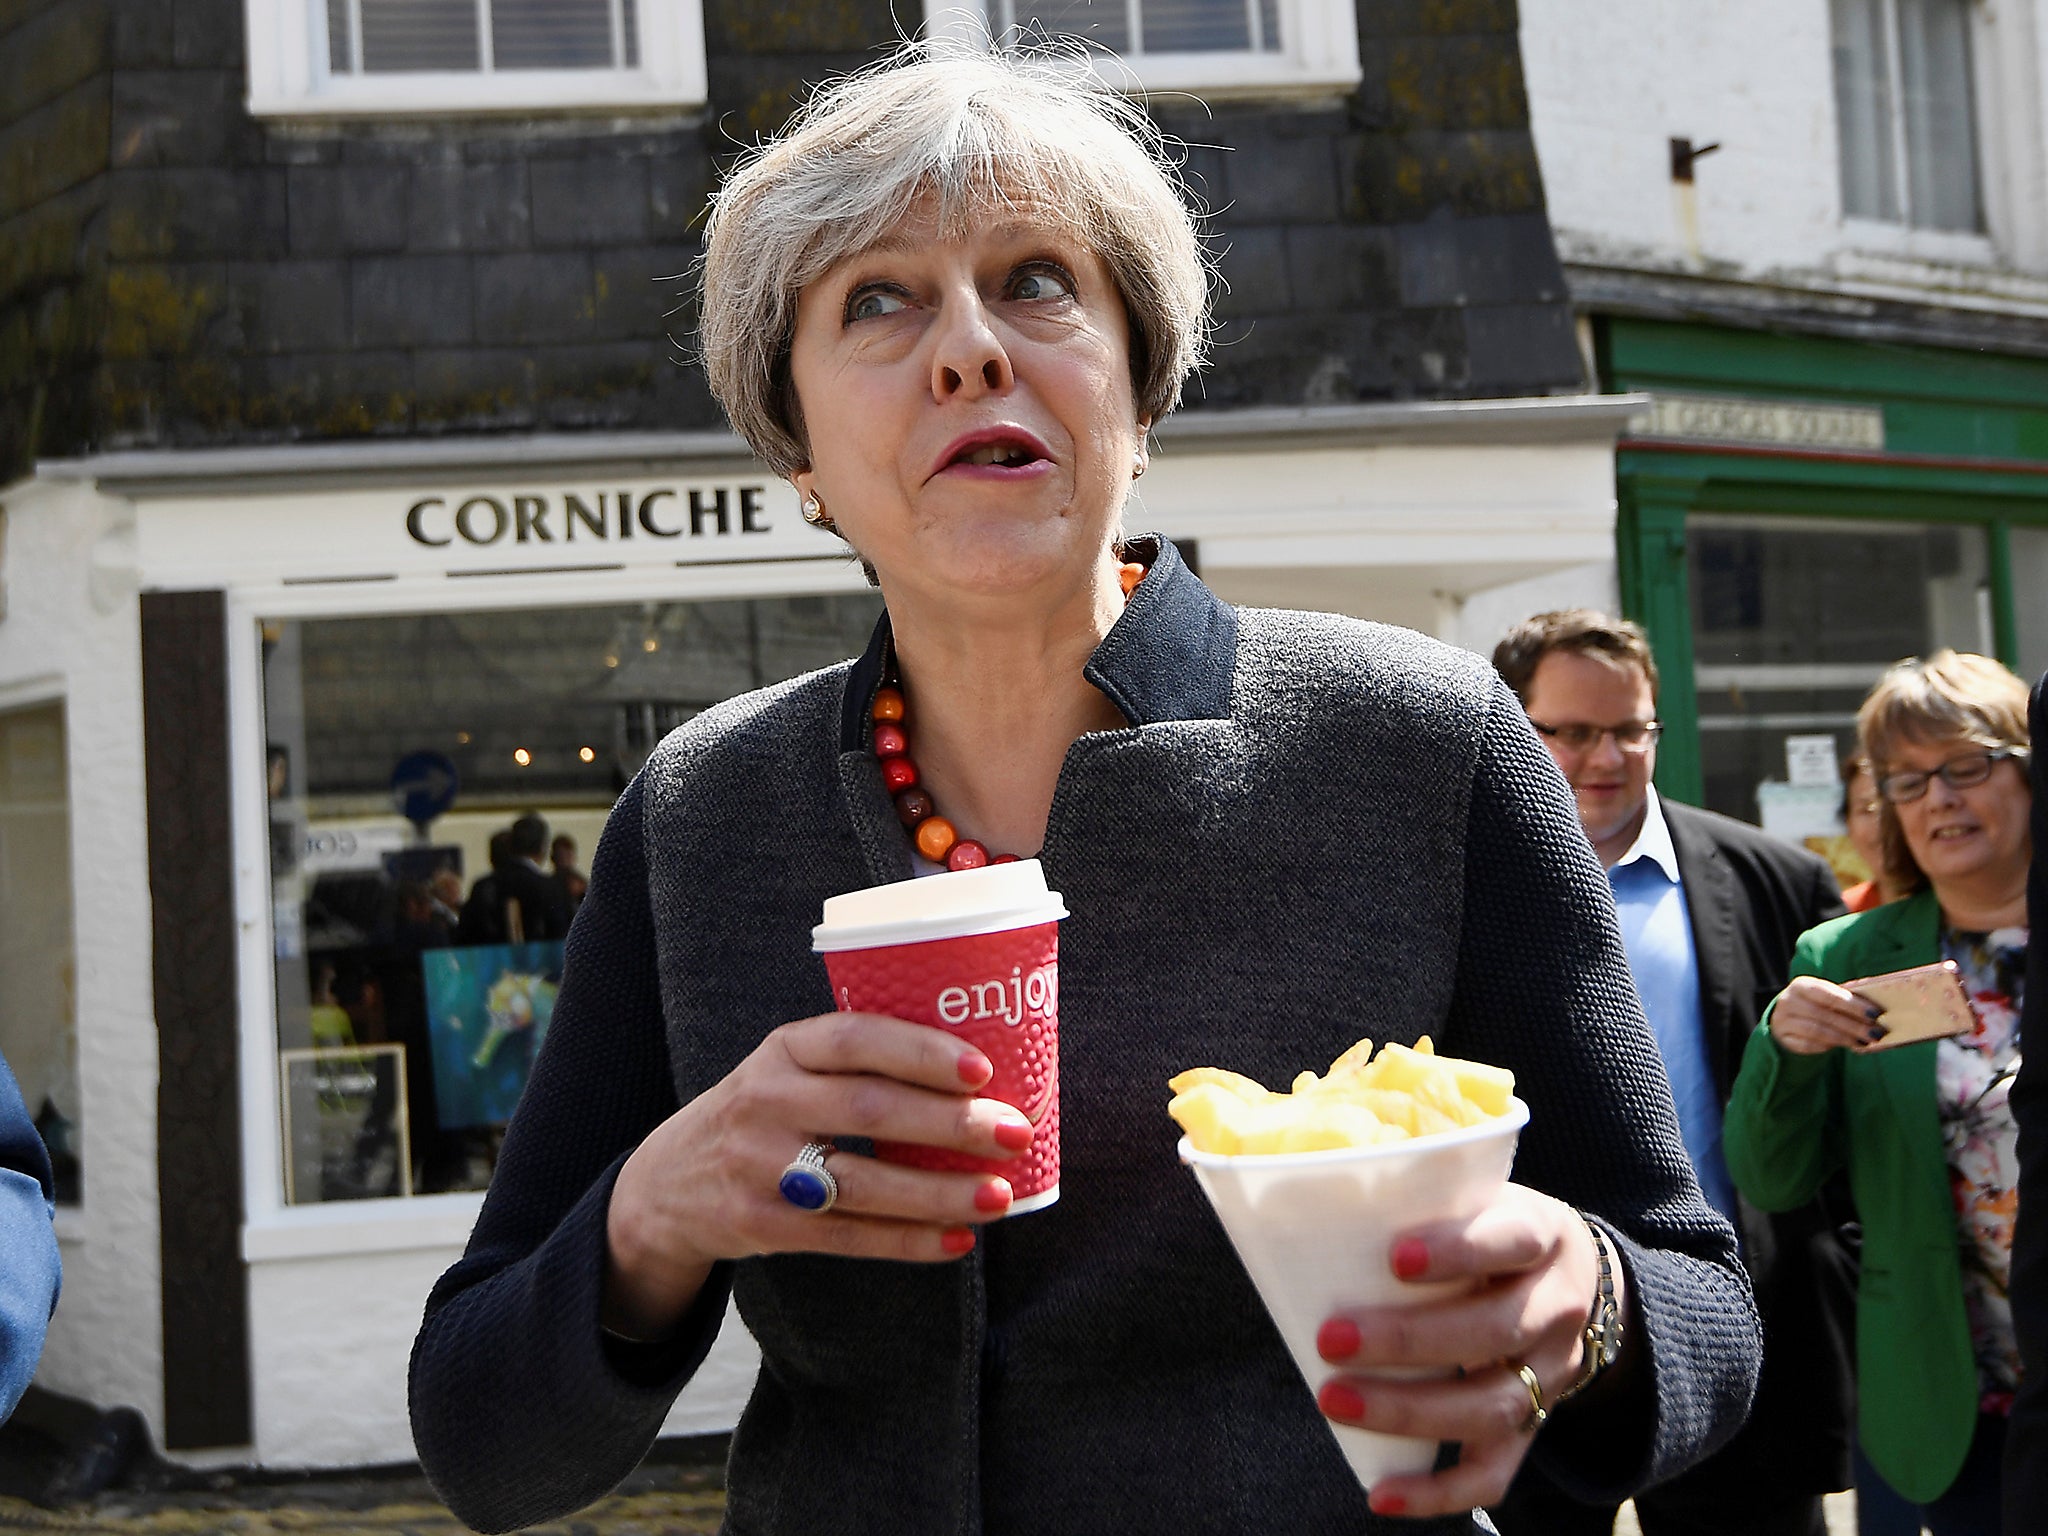 Britain's Prime Minister Theresa May enjoys some chips during a campaign stop in Mevagissey, Cornwall